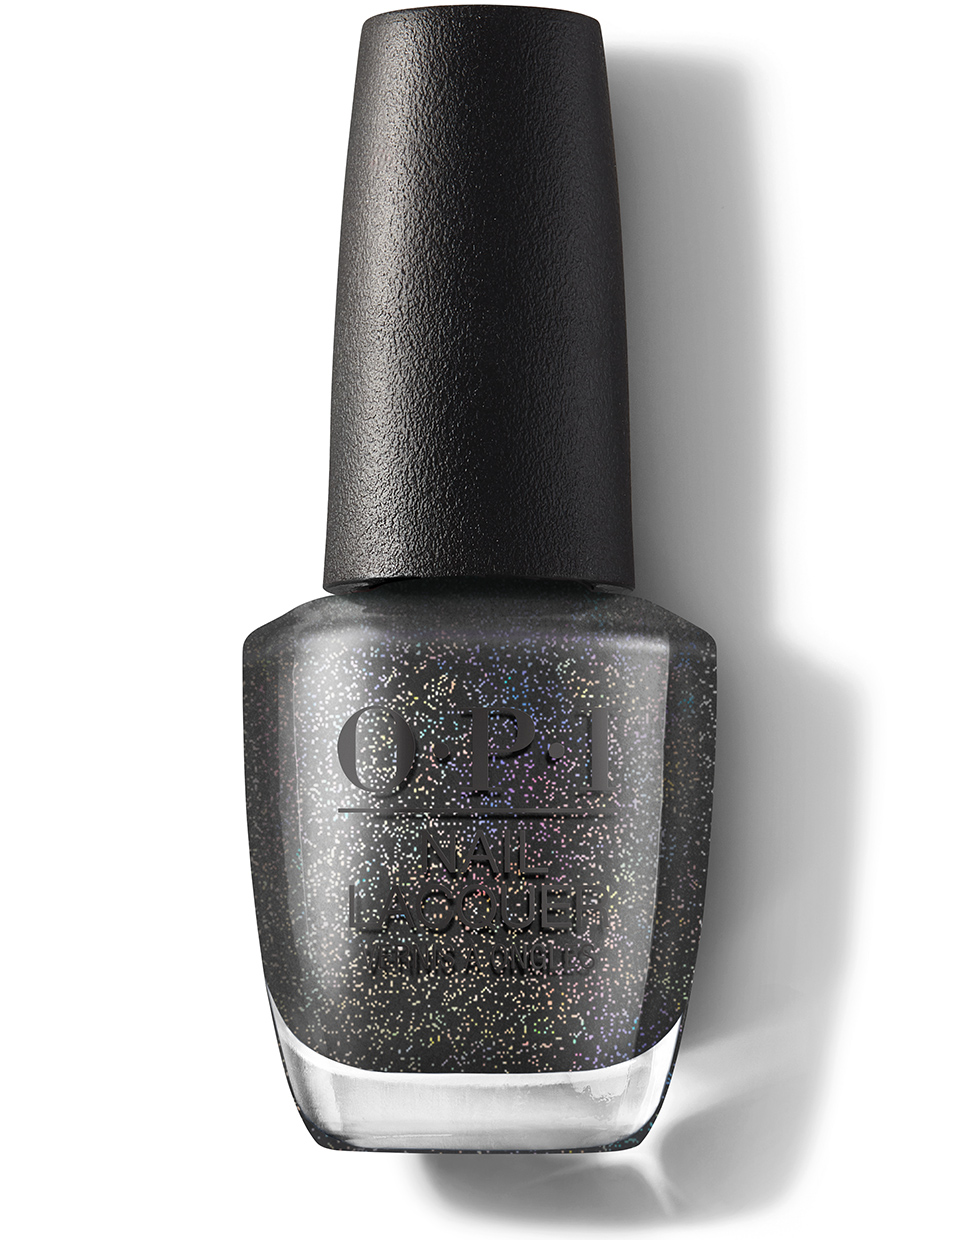 Turn Bright After Sunset - Nail Lacquer | OPI